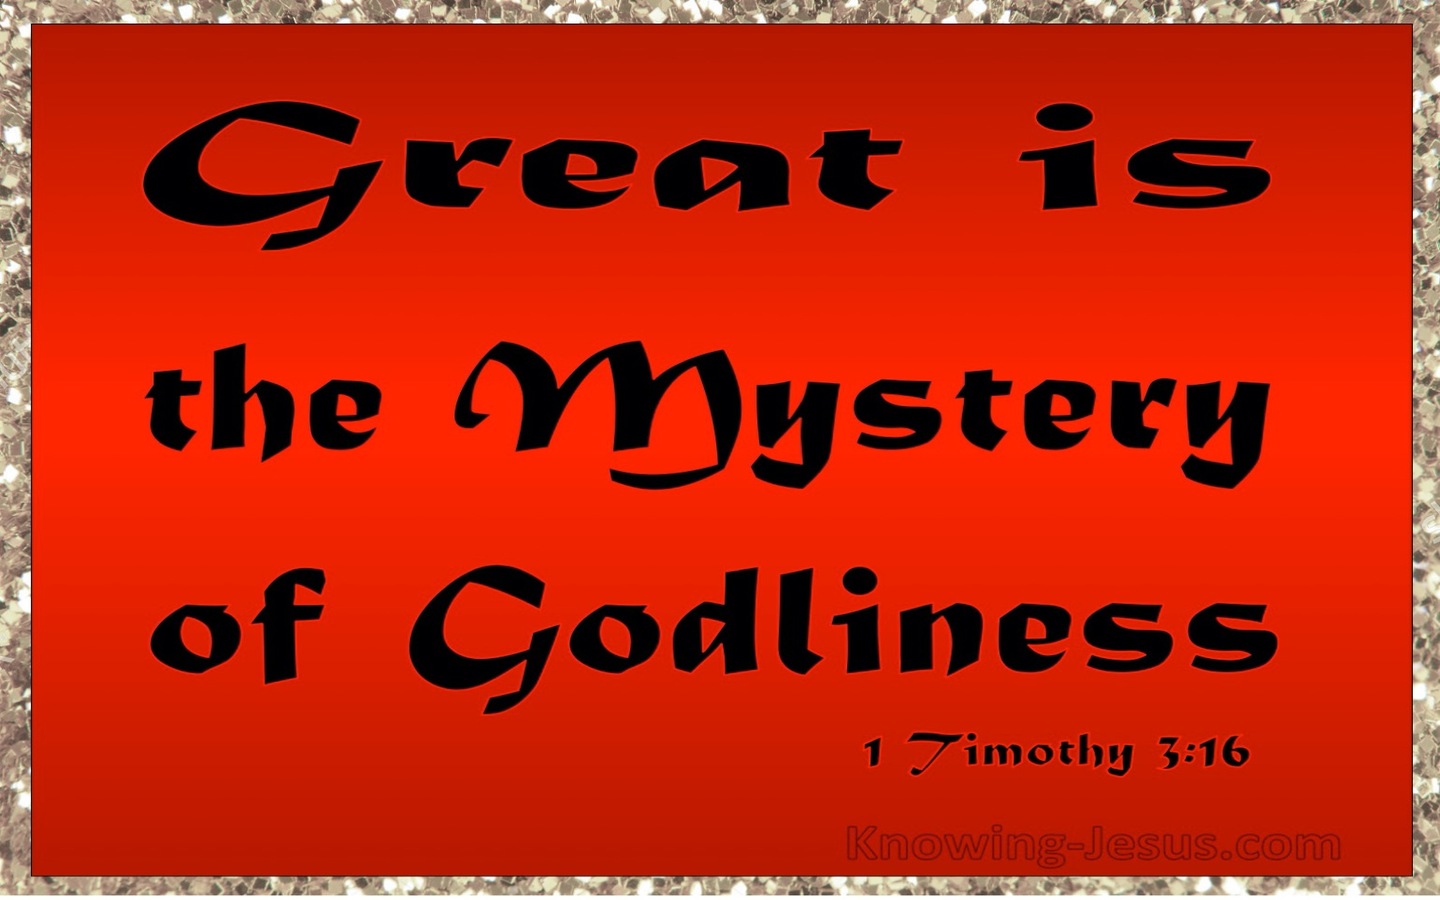 1 Timothy 3:16 An Example of Godliness (devotional)12:28   (red)